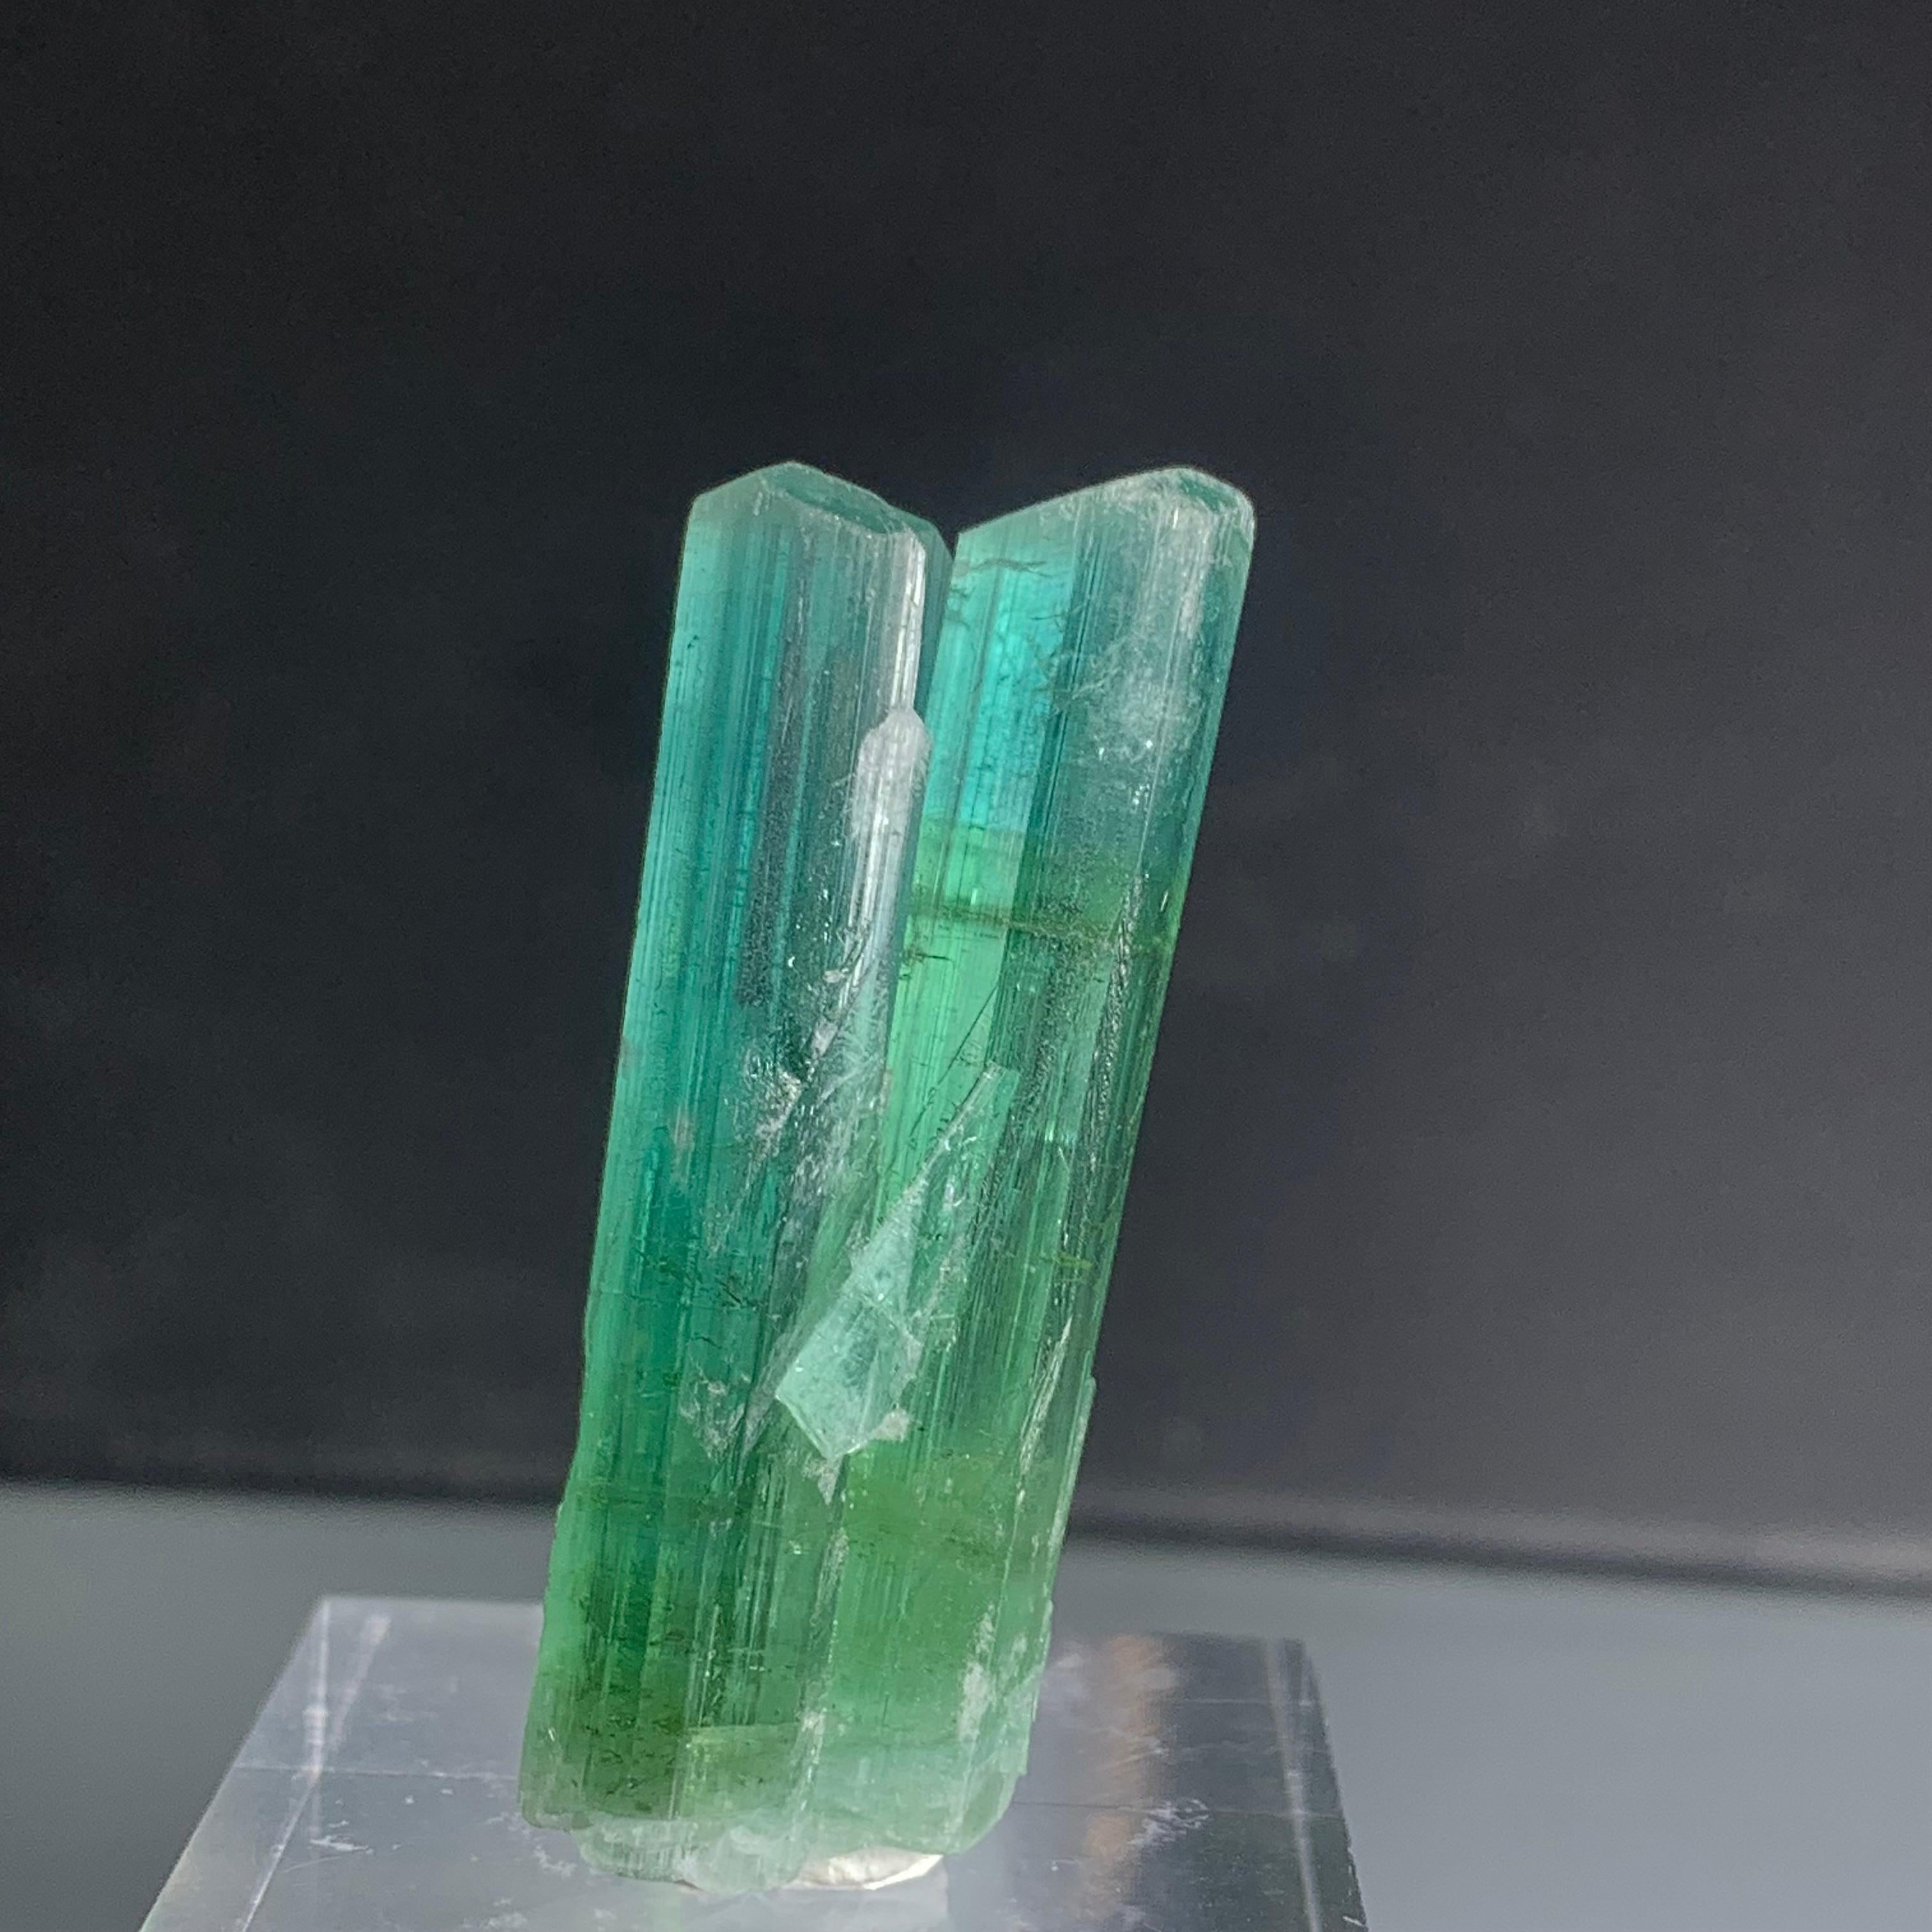 Natural Bi-Color Combined Tourmaline Crystal From Afghanistan
WEIGHT: 44.30 Carat
DIMENSION: 3.6 x 1.4 x 0.9 Cm
ORIGIN: Afghanistan
COLOR: Mint Green And Green
TREATMENT: None
Tourmaline is an extremely popular gemstone; the name Tourmaline is